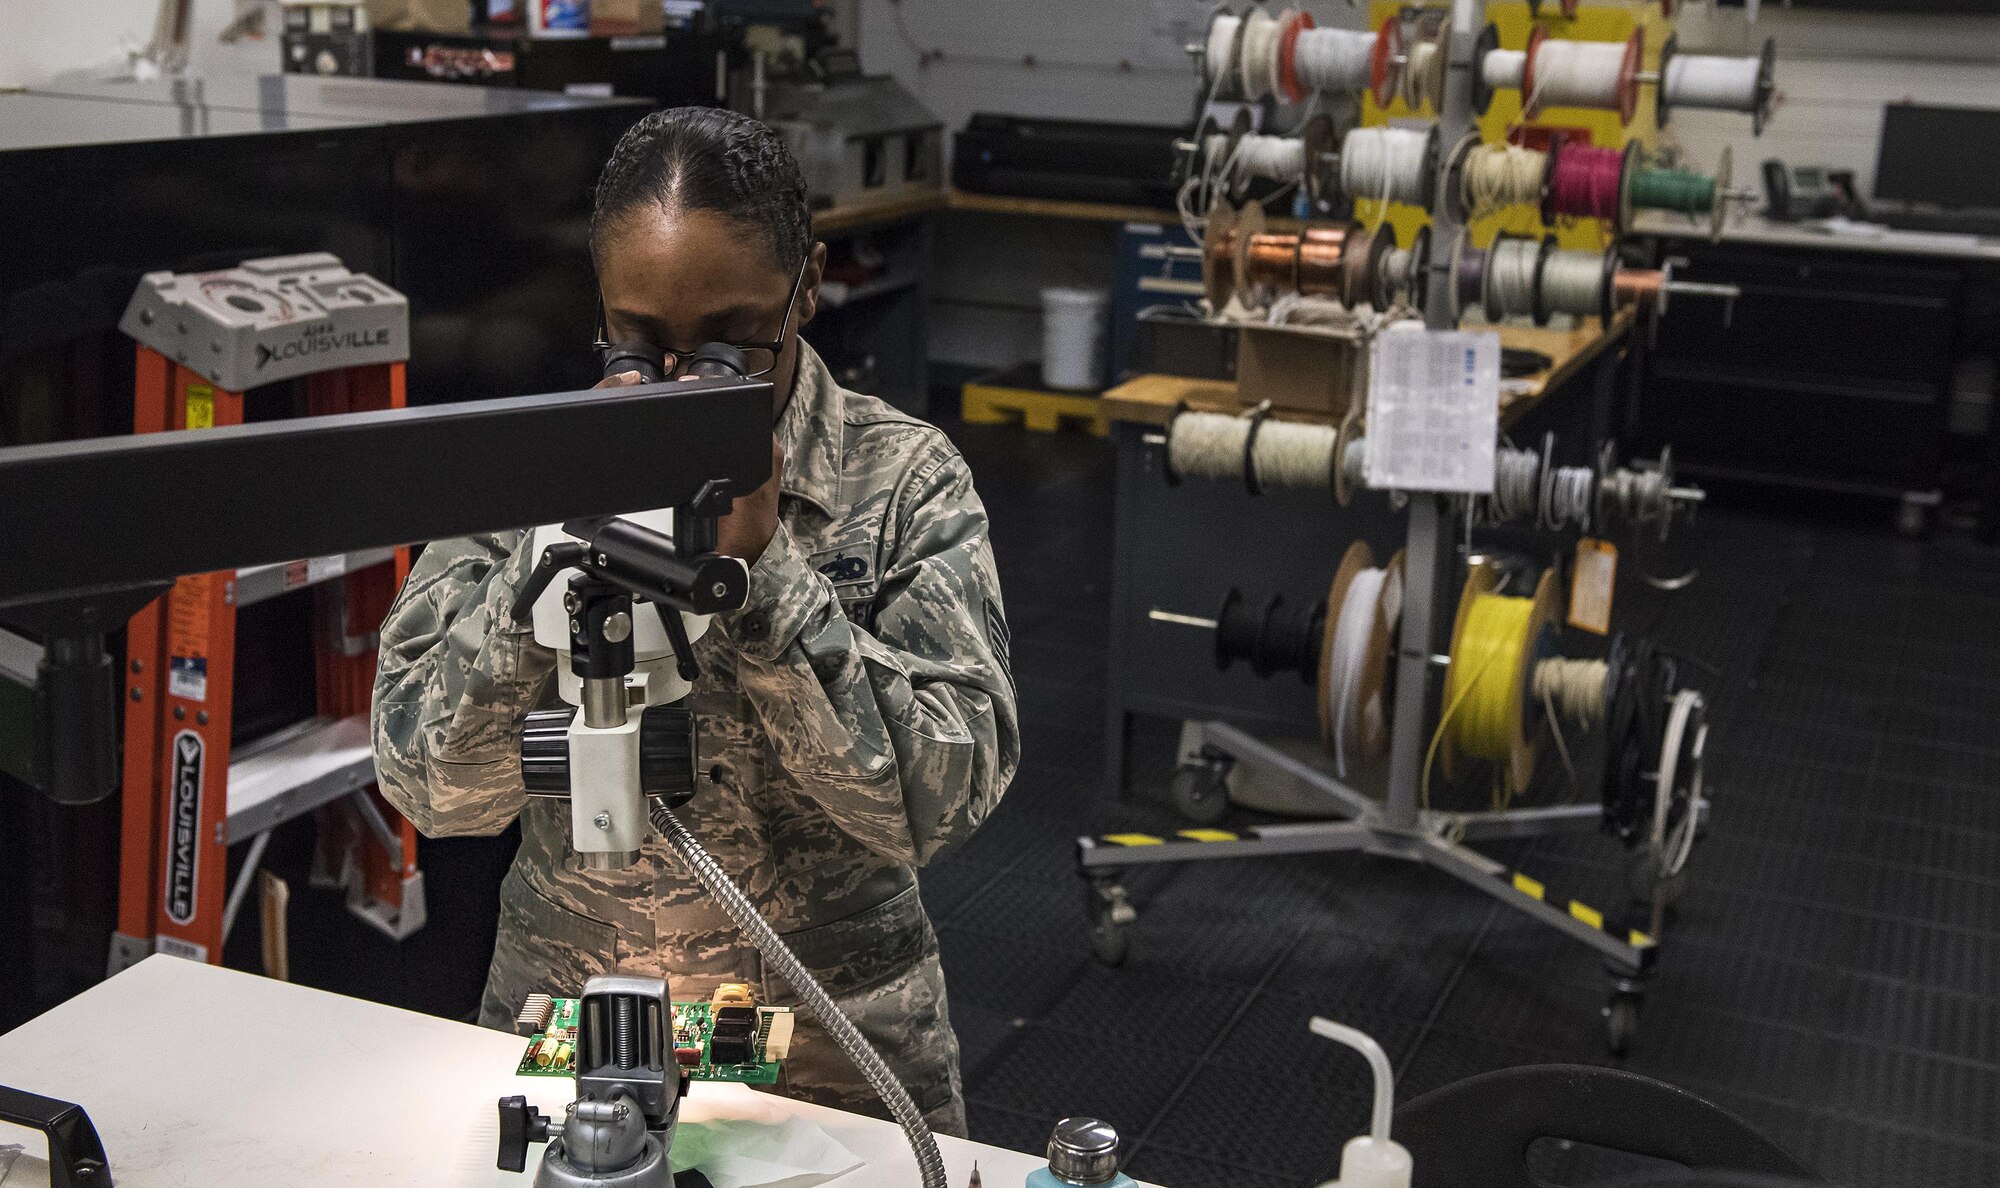 Staff Sgt. Alexandria Jones, 23d Maintenance Group Air Force Repair Enhancement Program technician, looks at microscopic components on a circuit board, Jan. 30, 2017, at Moody Air Force Base, Ga. Moody’s AFREP technicians saved the Air Force $2.4 million during fiscal year 2016 by fixing repairable parts. (U.S. Air Force photo by Airman 1st Class Janiqua P. Robinson)